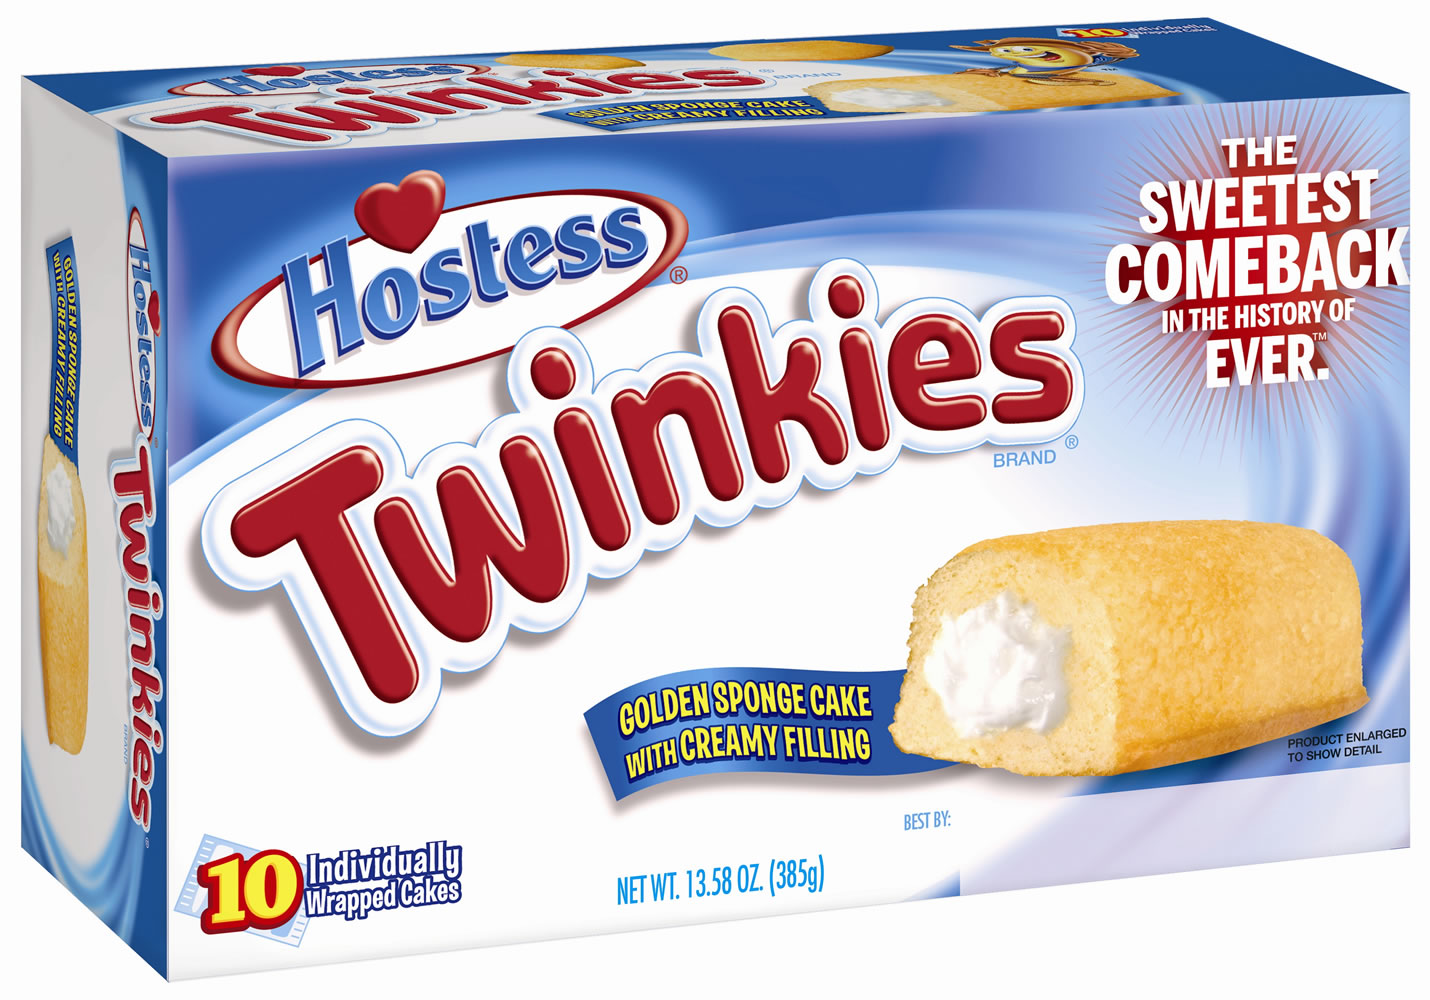 Twinkies will be back on shelves by July 15 after its predecessor company went bankrupt after an acrimonious fight with unions last year. The brands have since been purchased y Metropoulos &amp; Co.